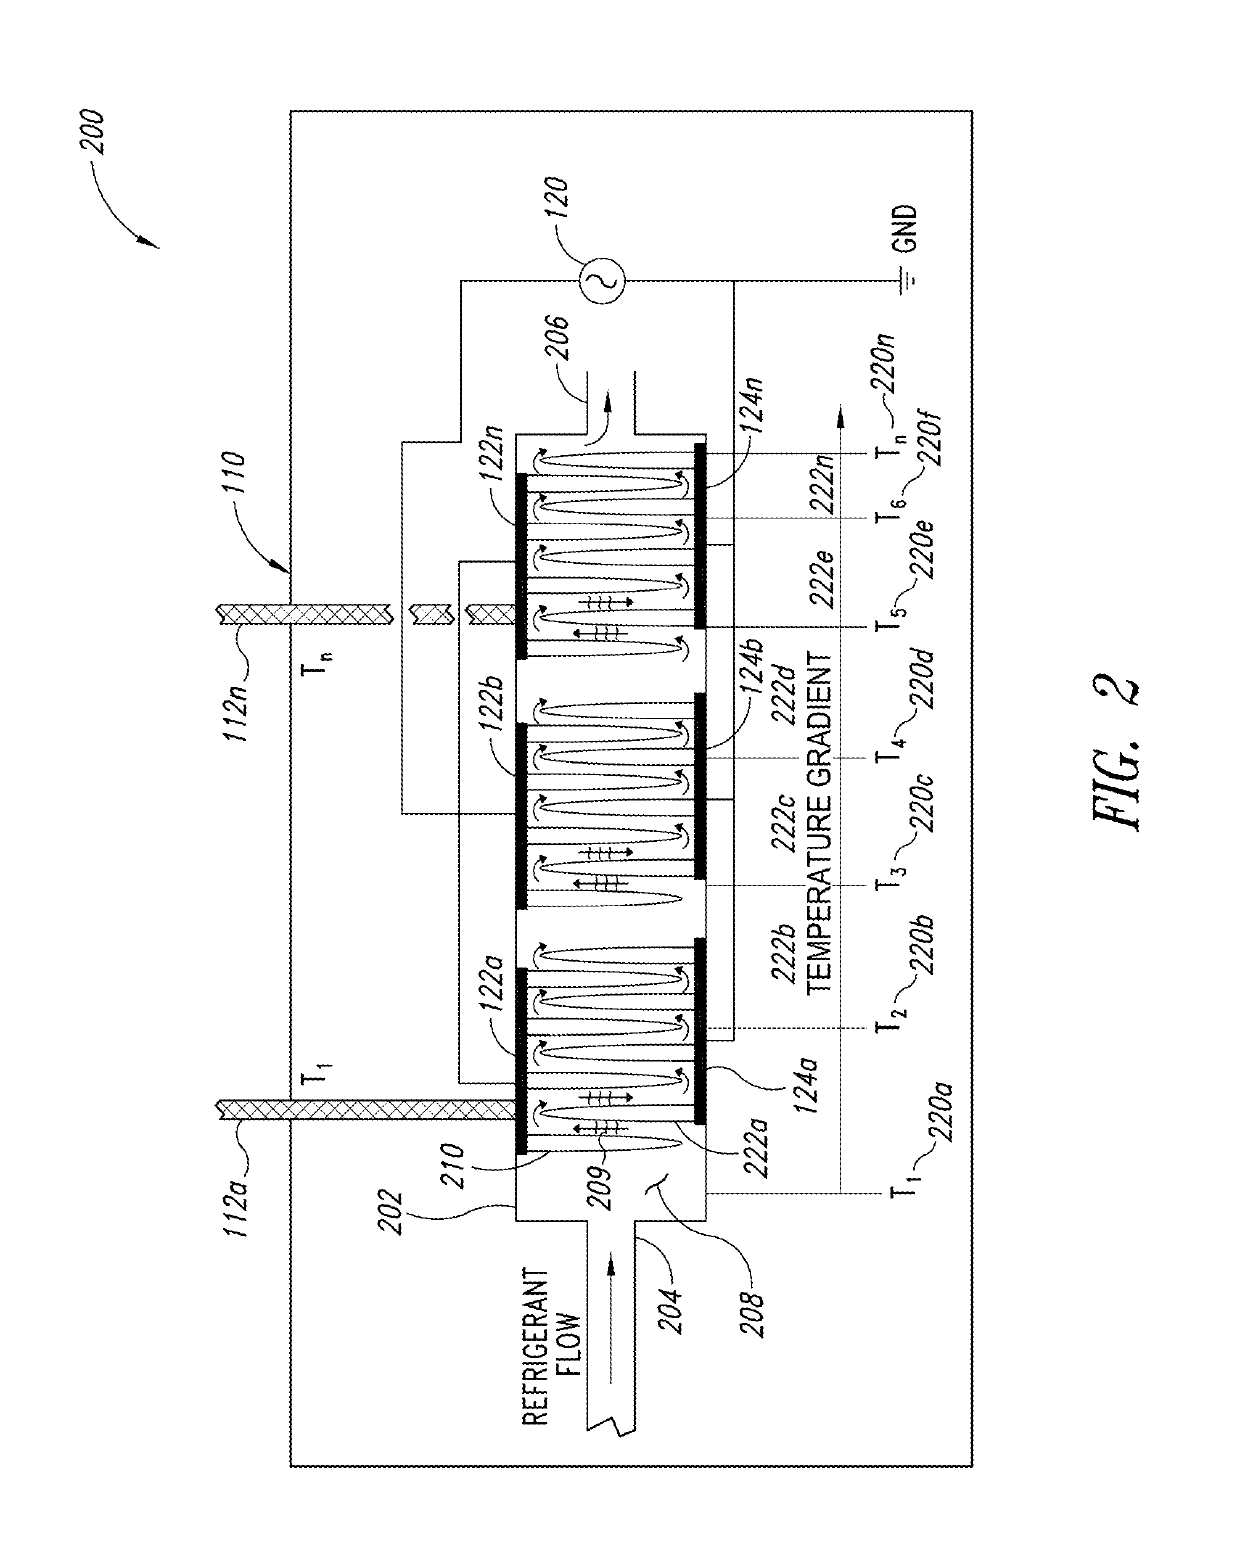 Systems and methods for electrostatic trapping of contaminants in cryogenic refrigeration systems